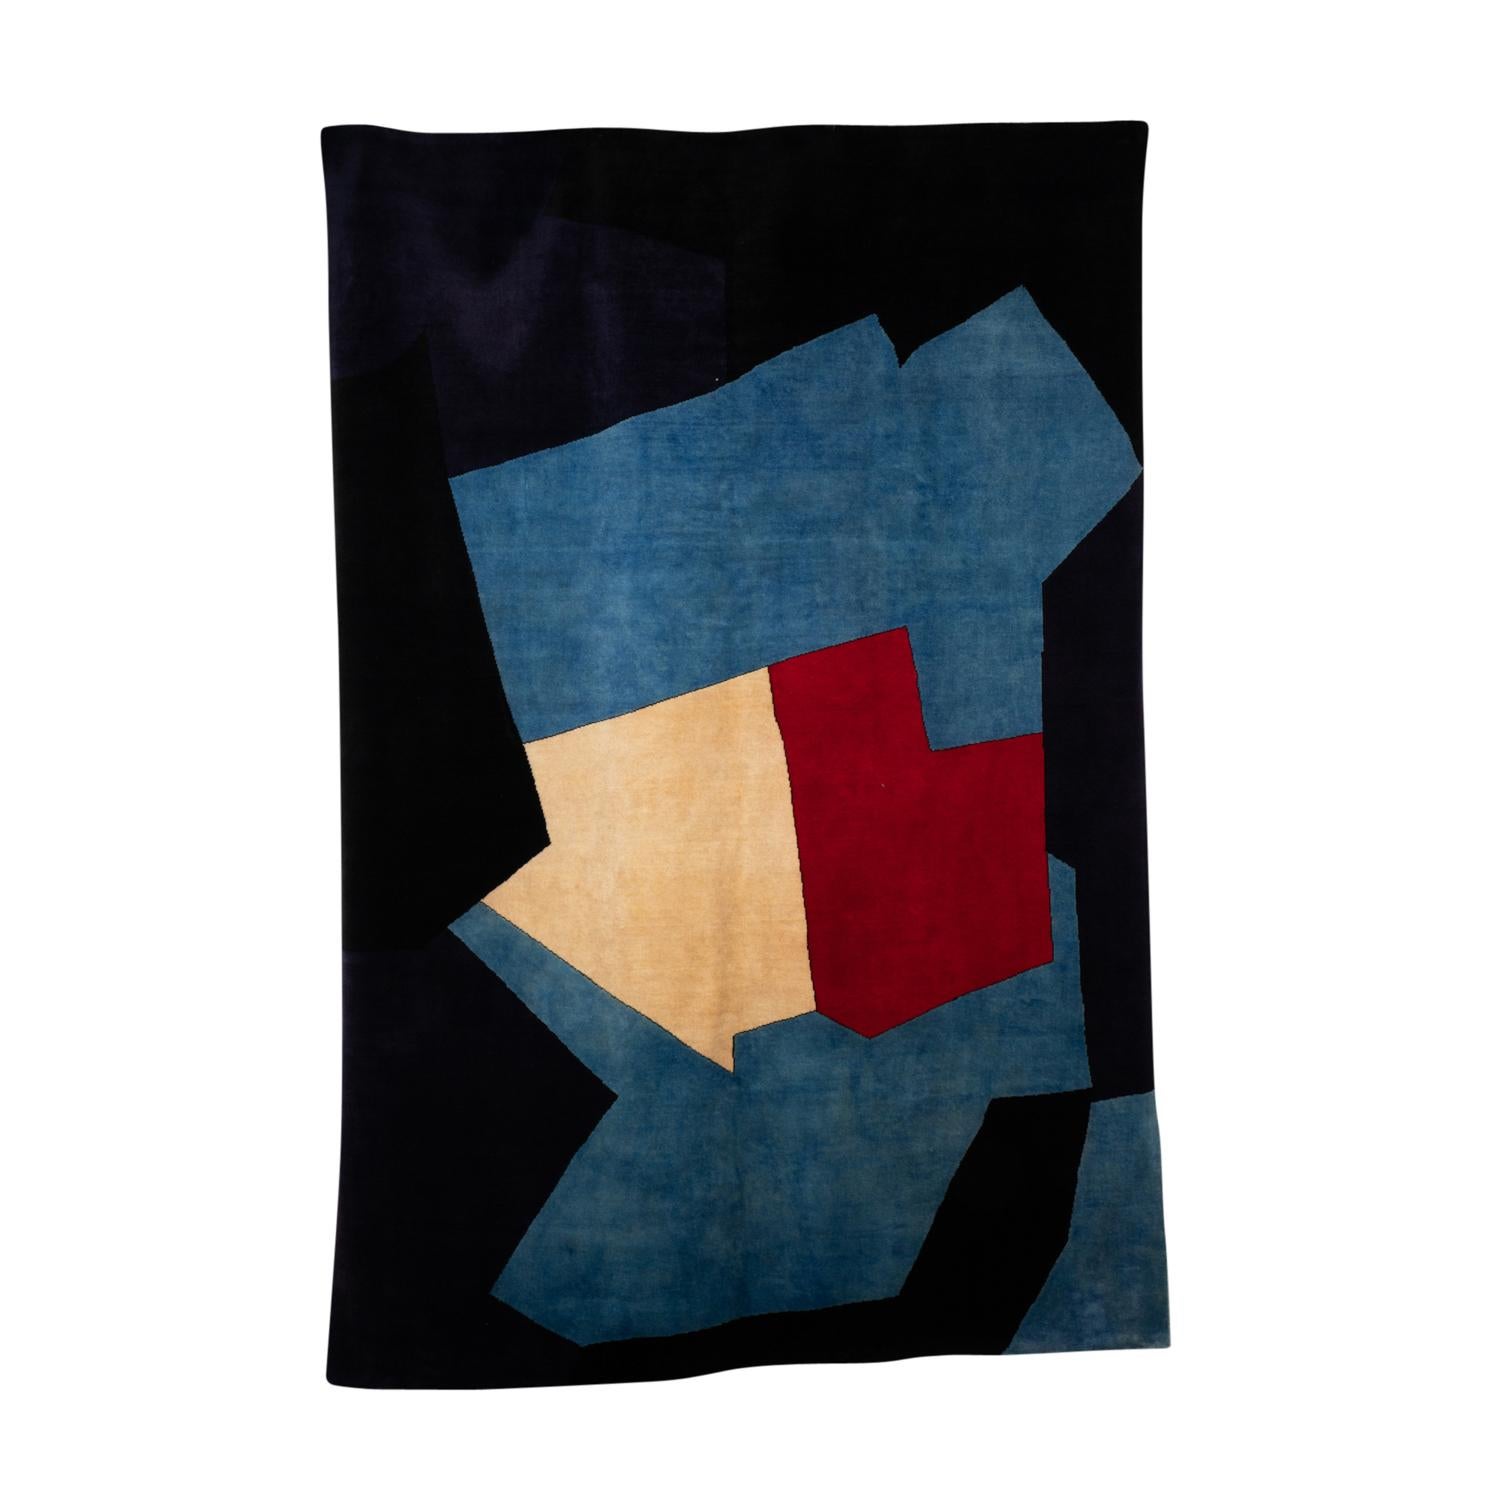 Rug, or tapestry, inspired by Serge Poliakoff, in shades of blue, red, beige and black. Hand-knotted in Merino wool.

Contemporary craftsmanship.

Numbered 1/8. Surface area: 6 square meters. Density: 840 000 knots.

Delivered with a certificate of